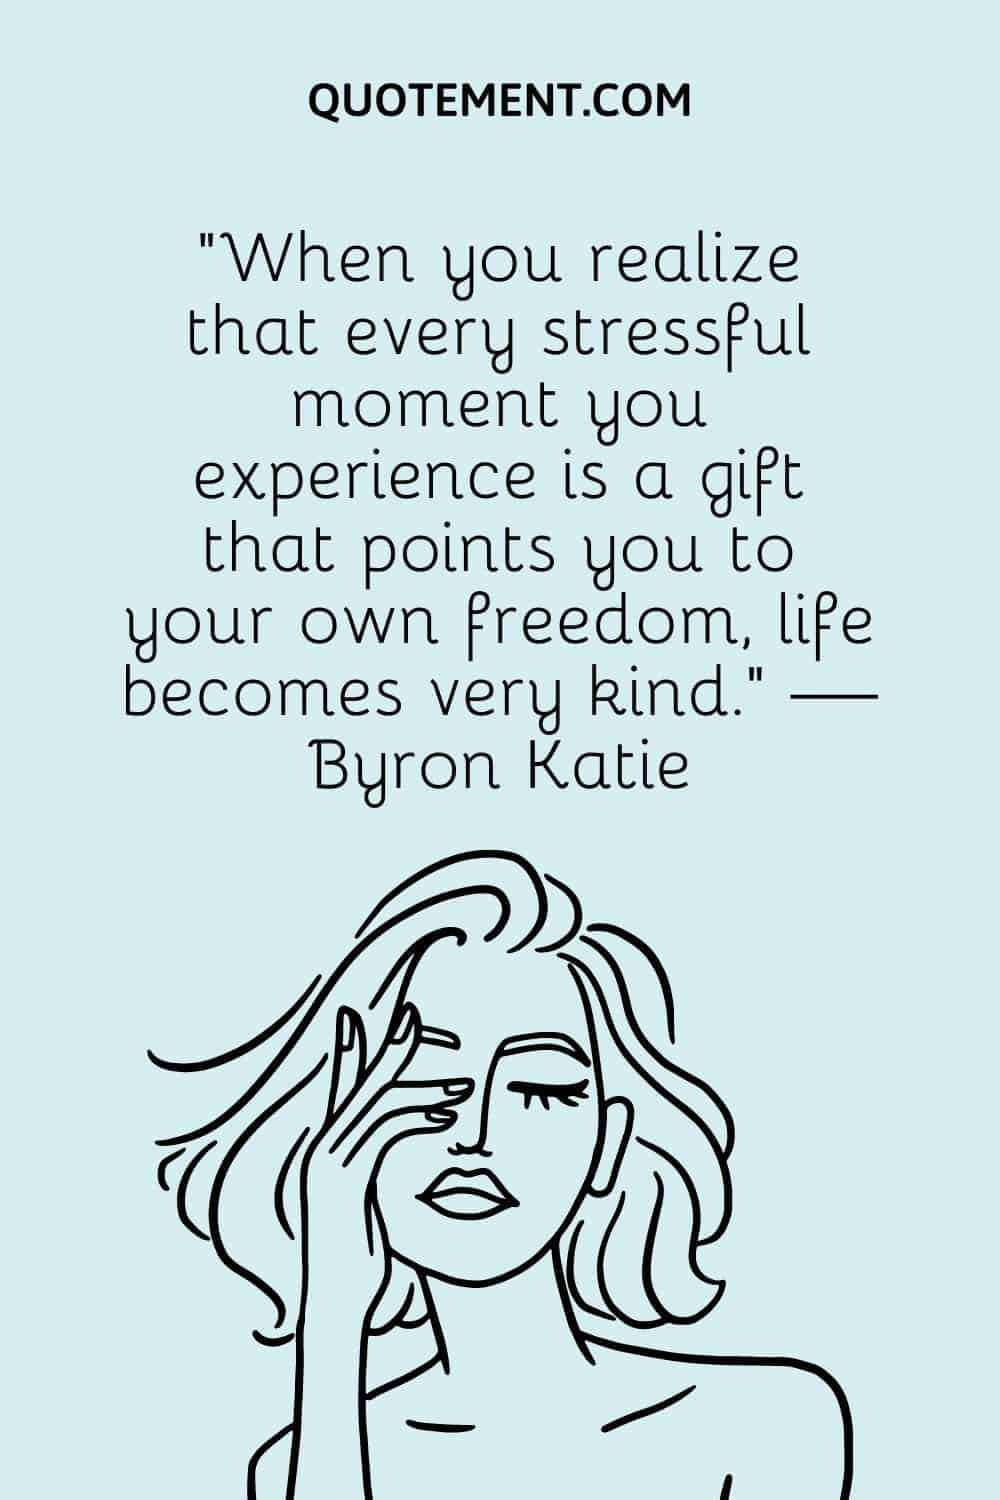 When you realize that every stressful moment you experience is a gift that points you to your own freedom, life becomes very kind